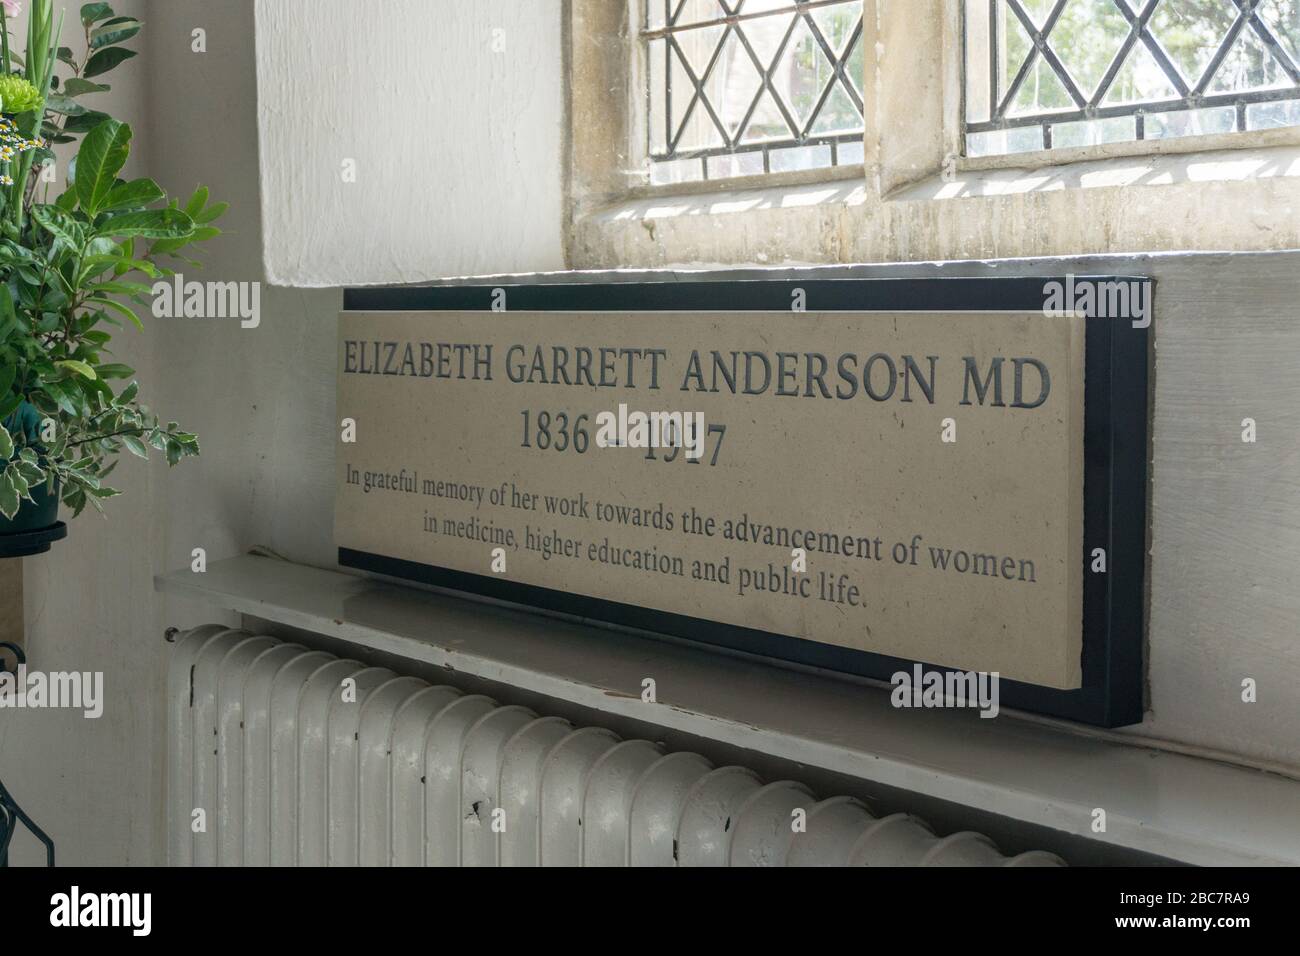 Monument to Elizabeth Garrett Anderson MD, the first woman doctor in England, St Peter and St Pauls, Aldeburgh, UK Stock Photo